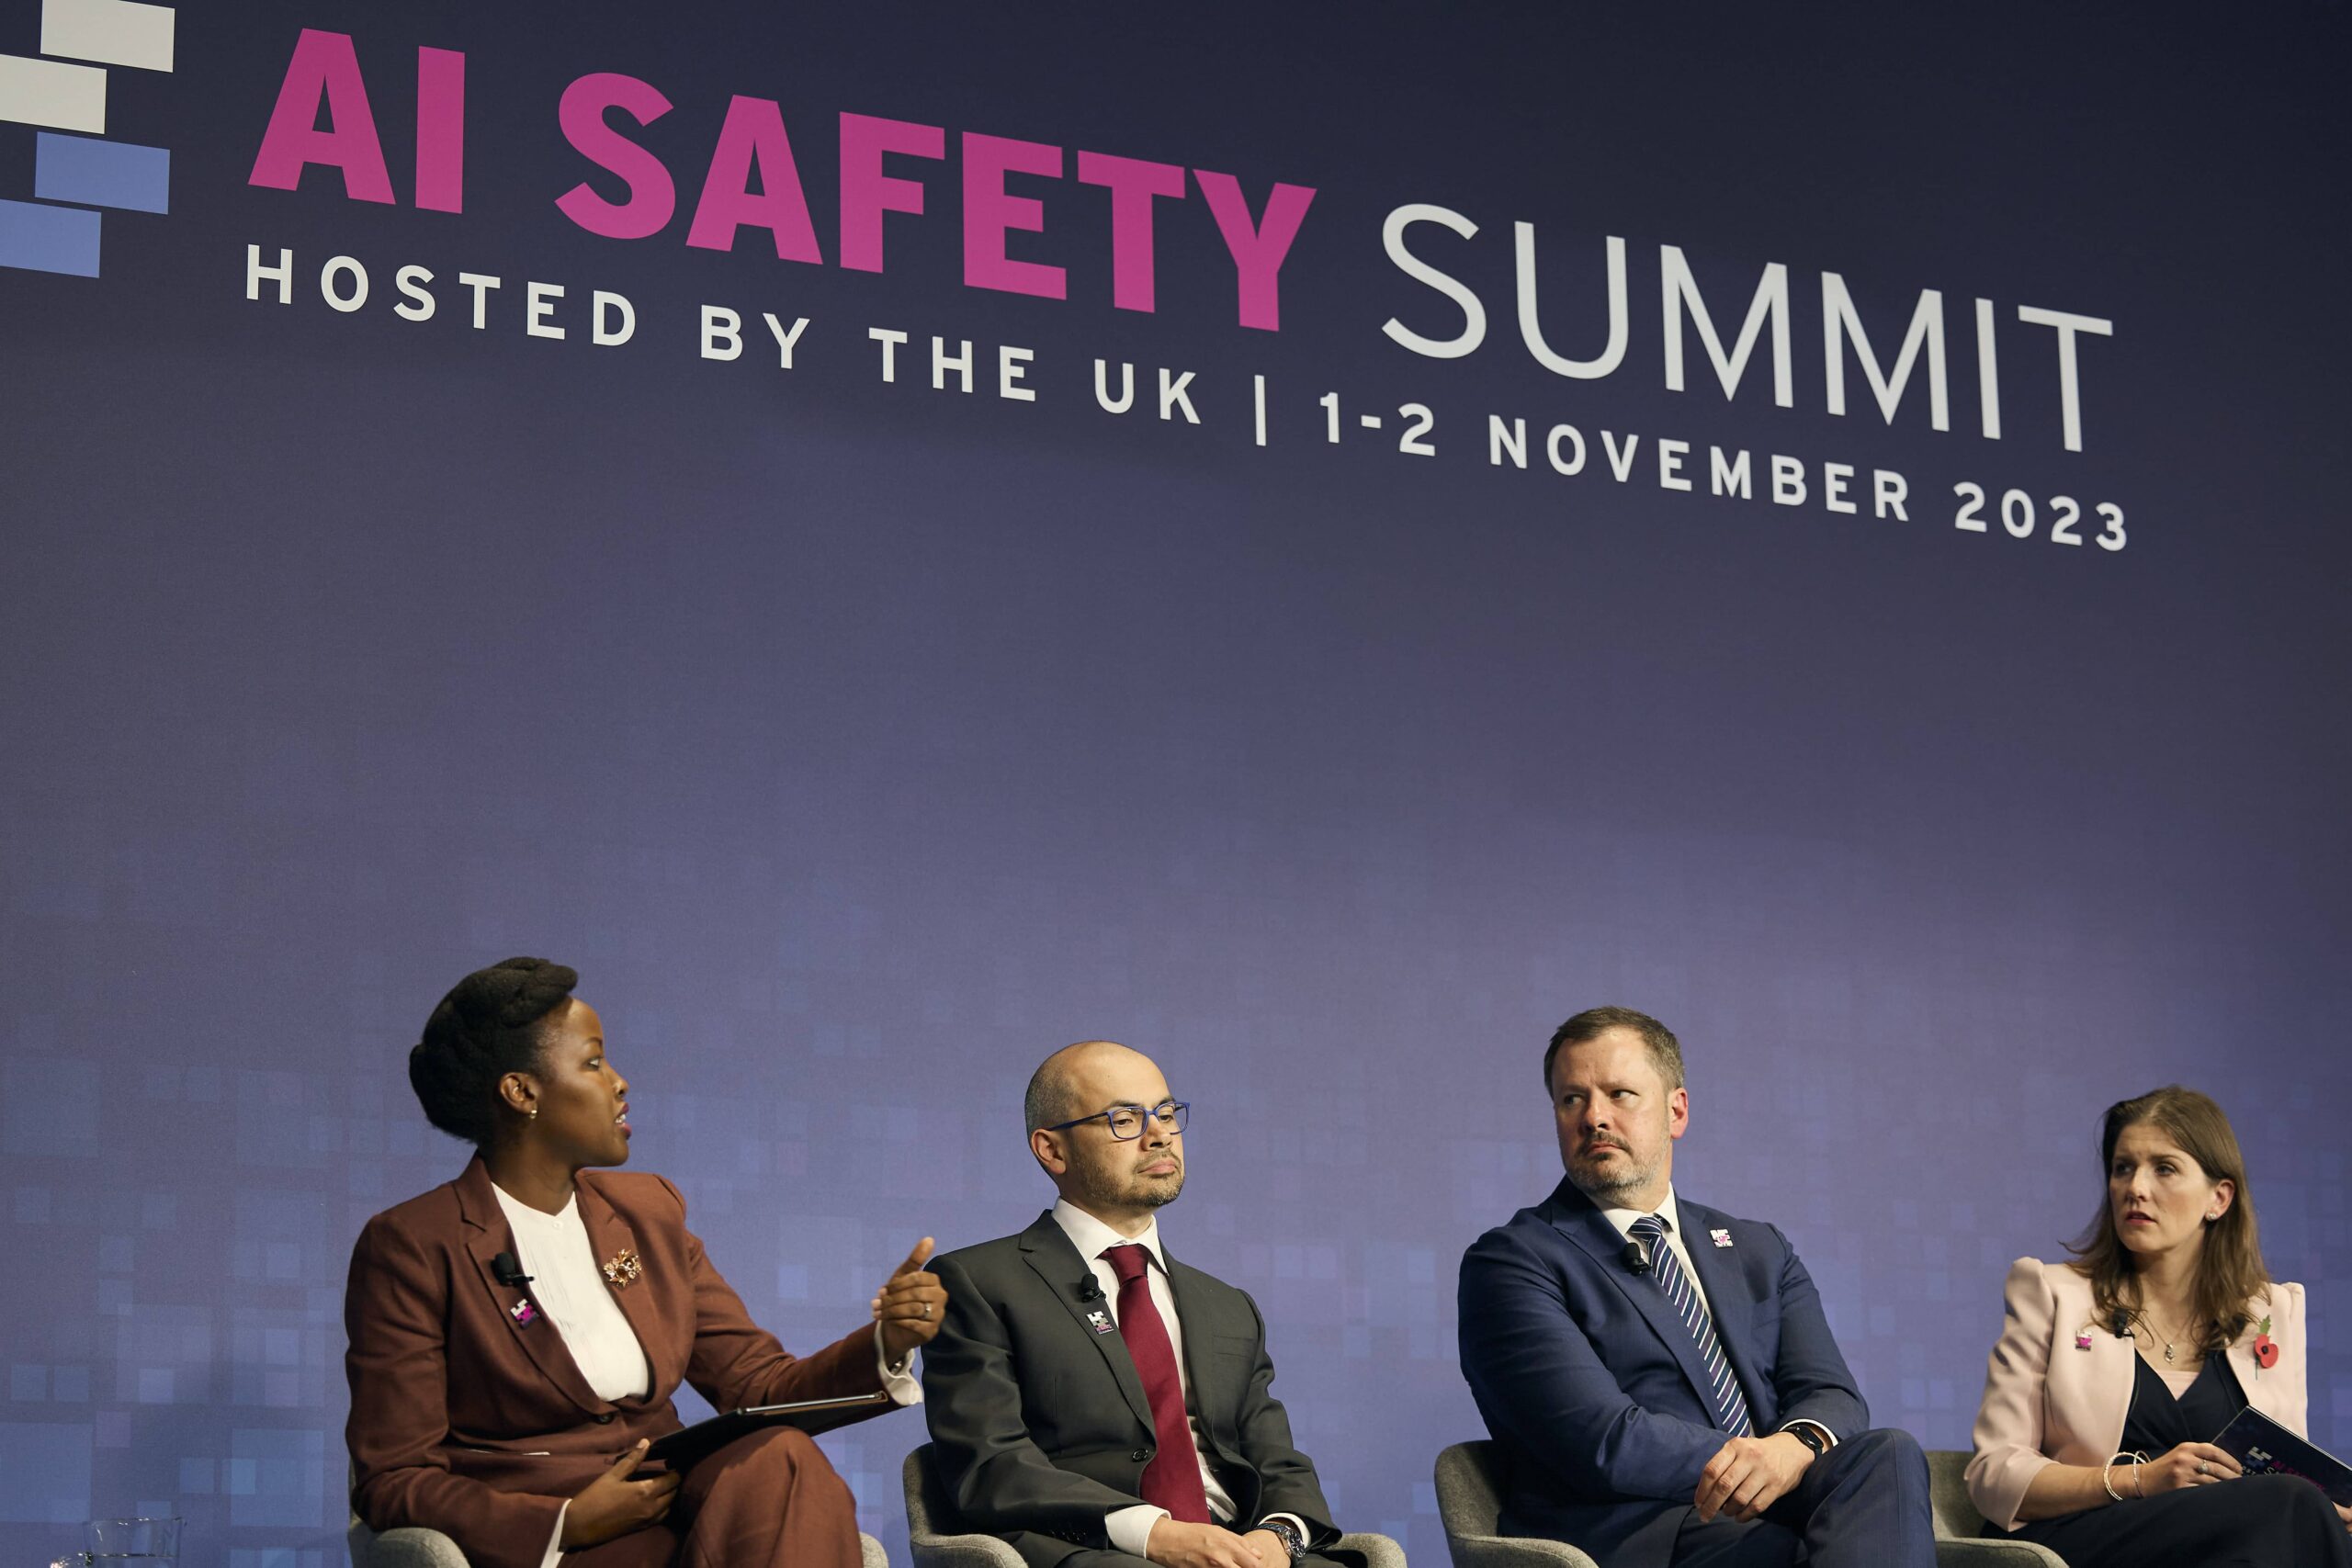 Panel discussion at the AI Safety Summit